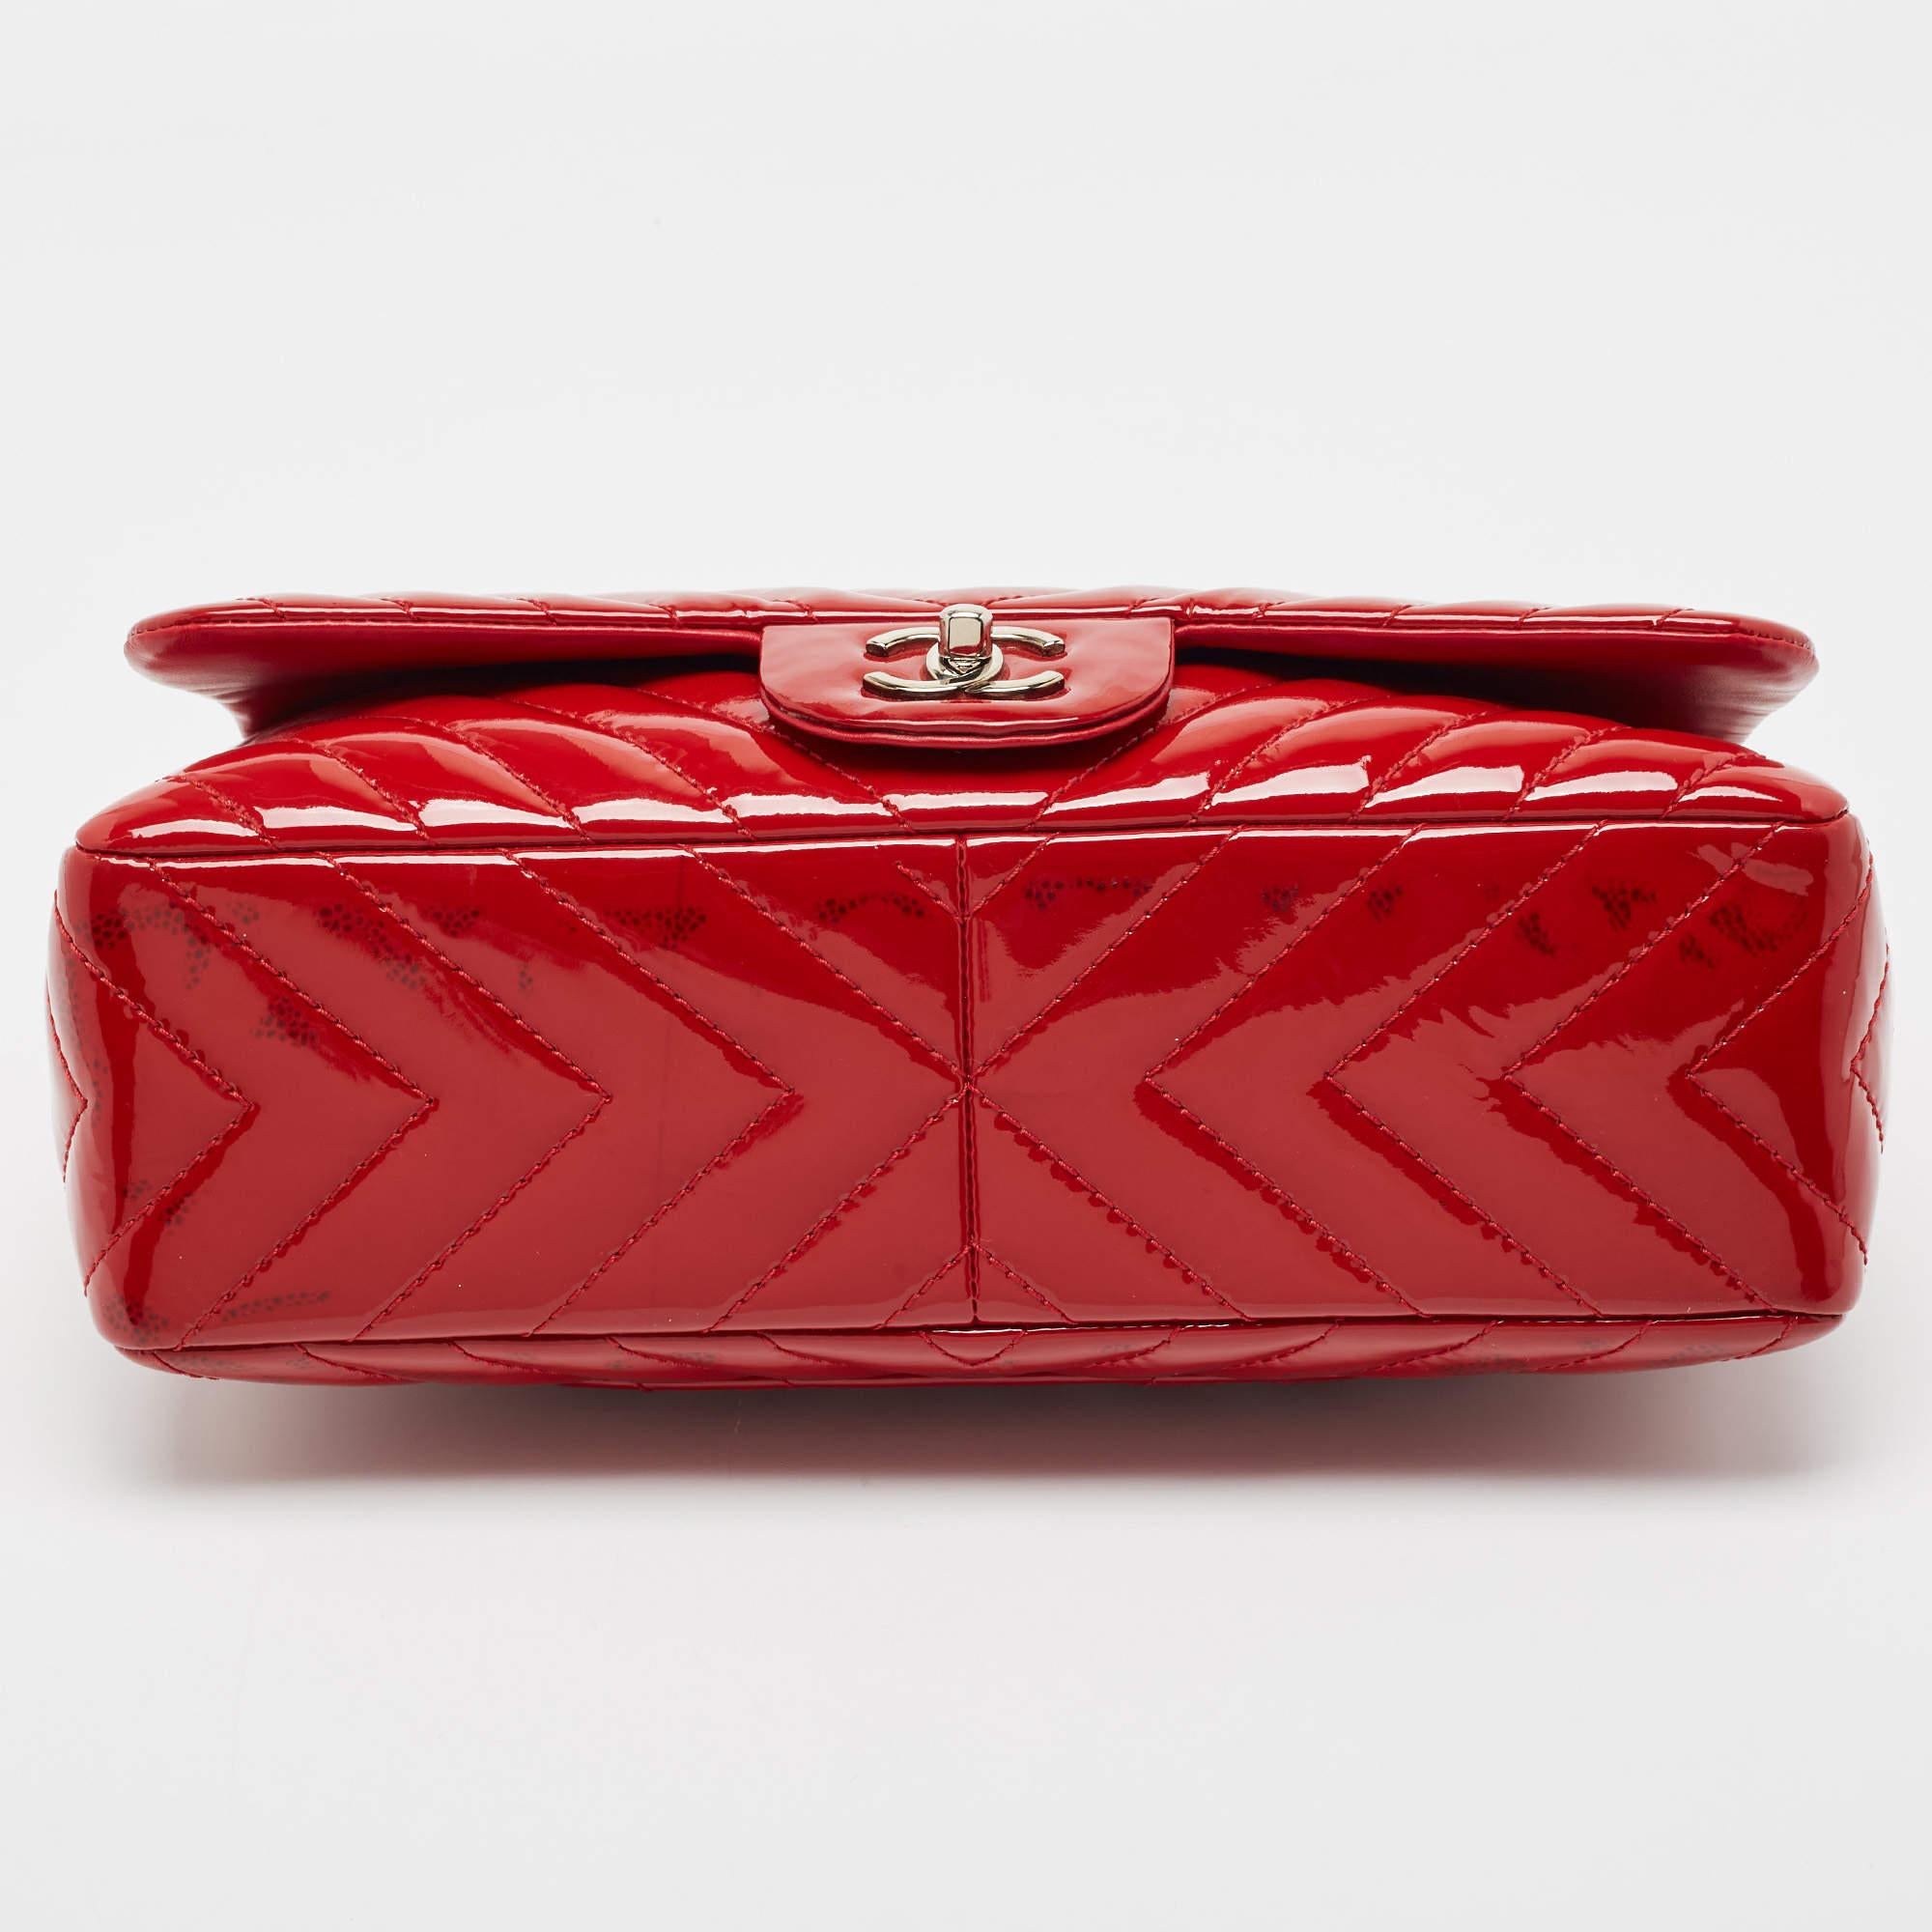 Chanel Red Patent Leather Chevron Jumbo Classic Flap Bag For Sale 7